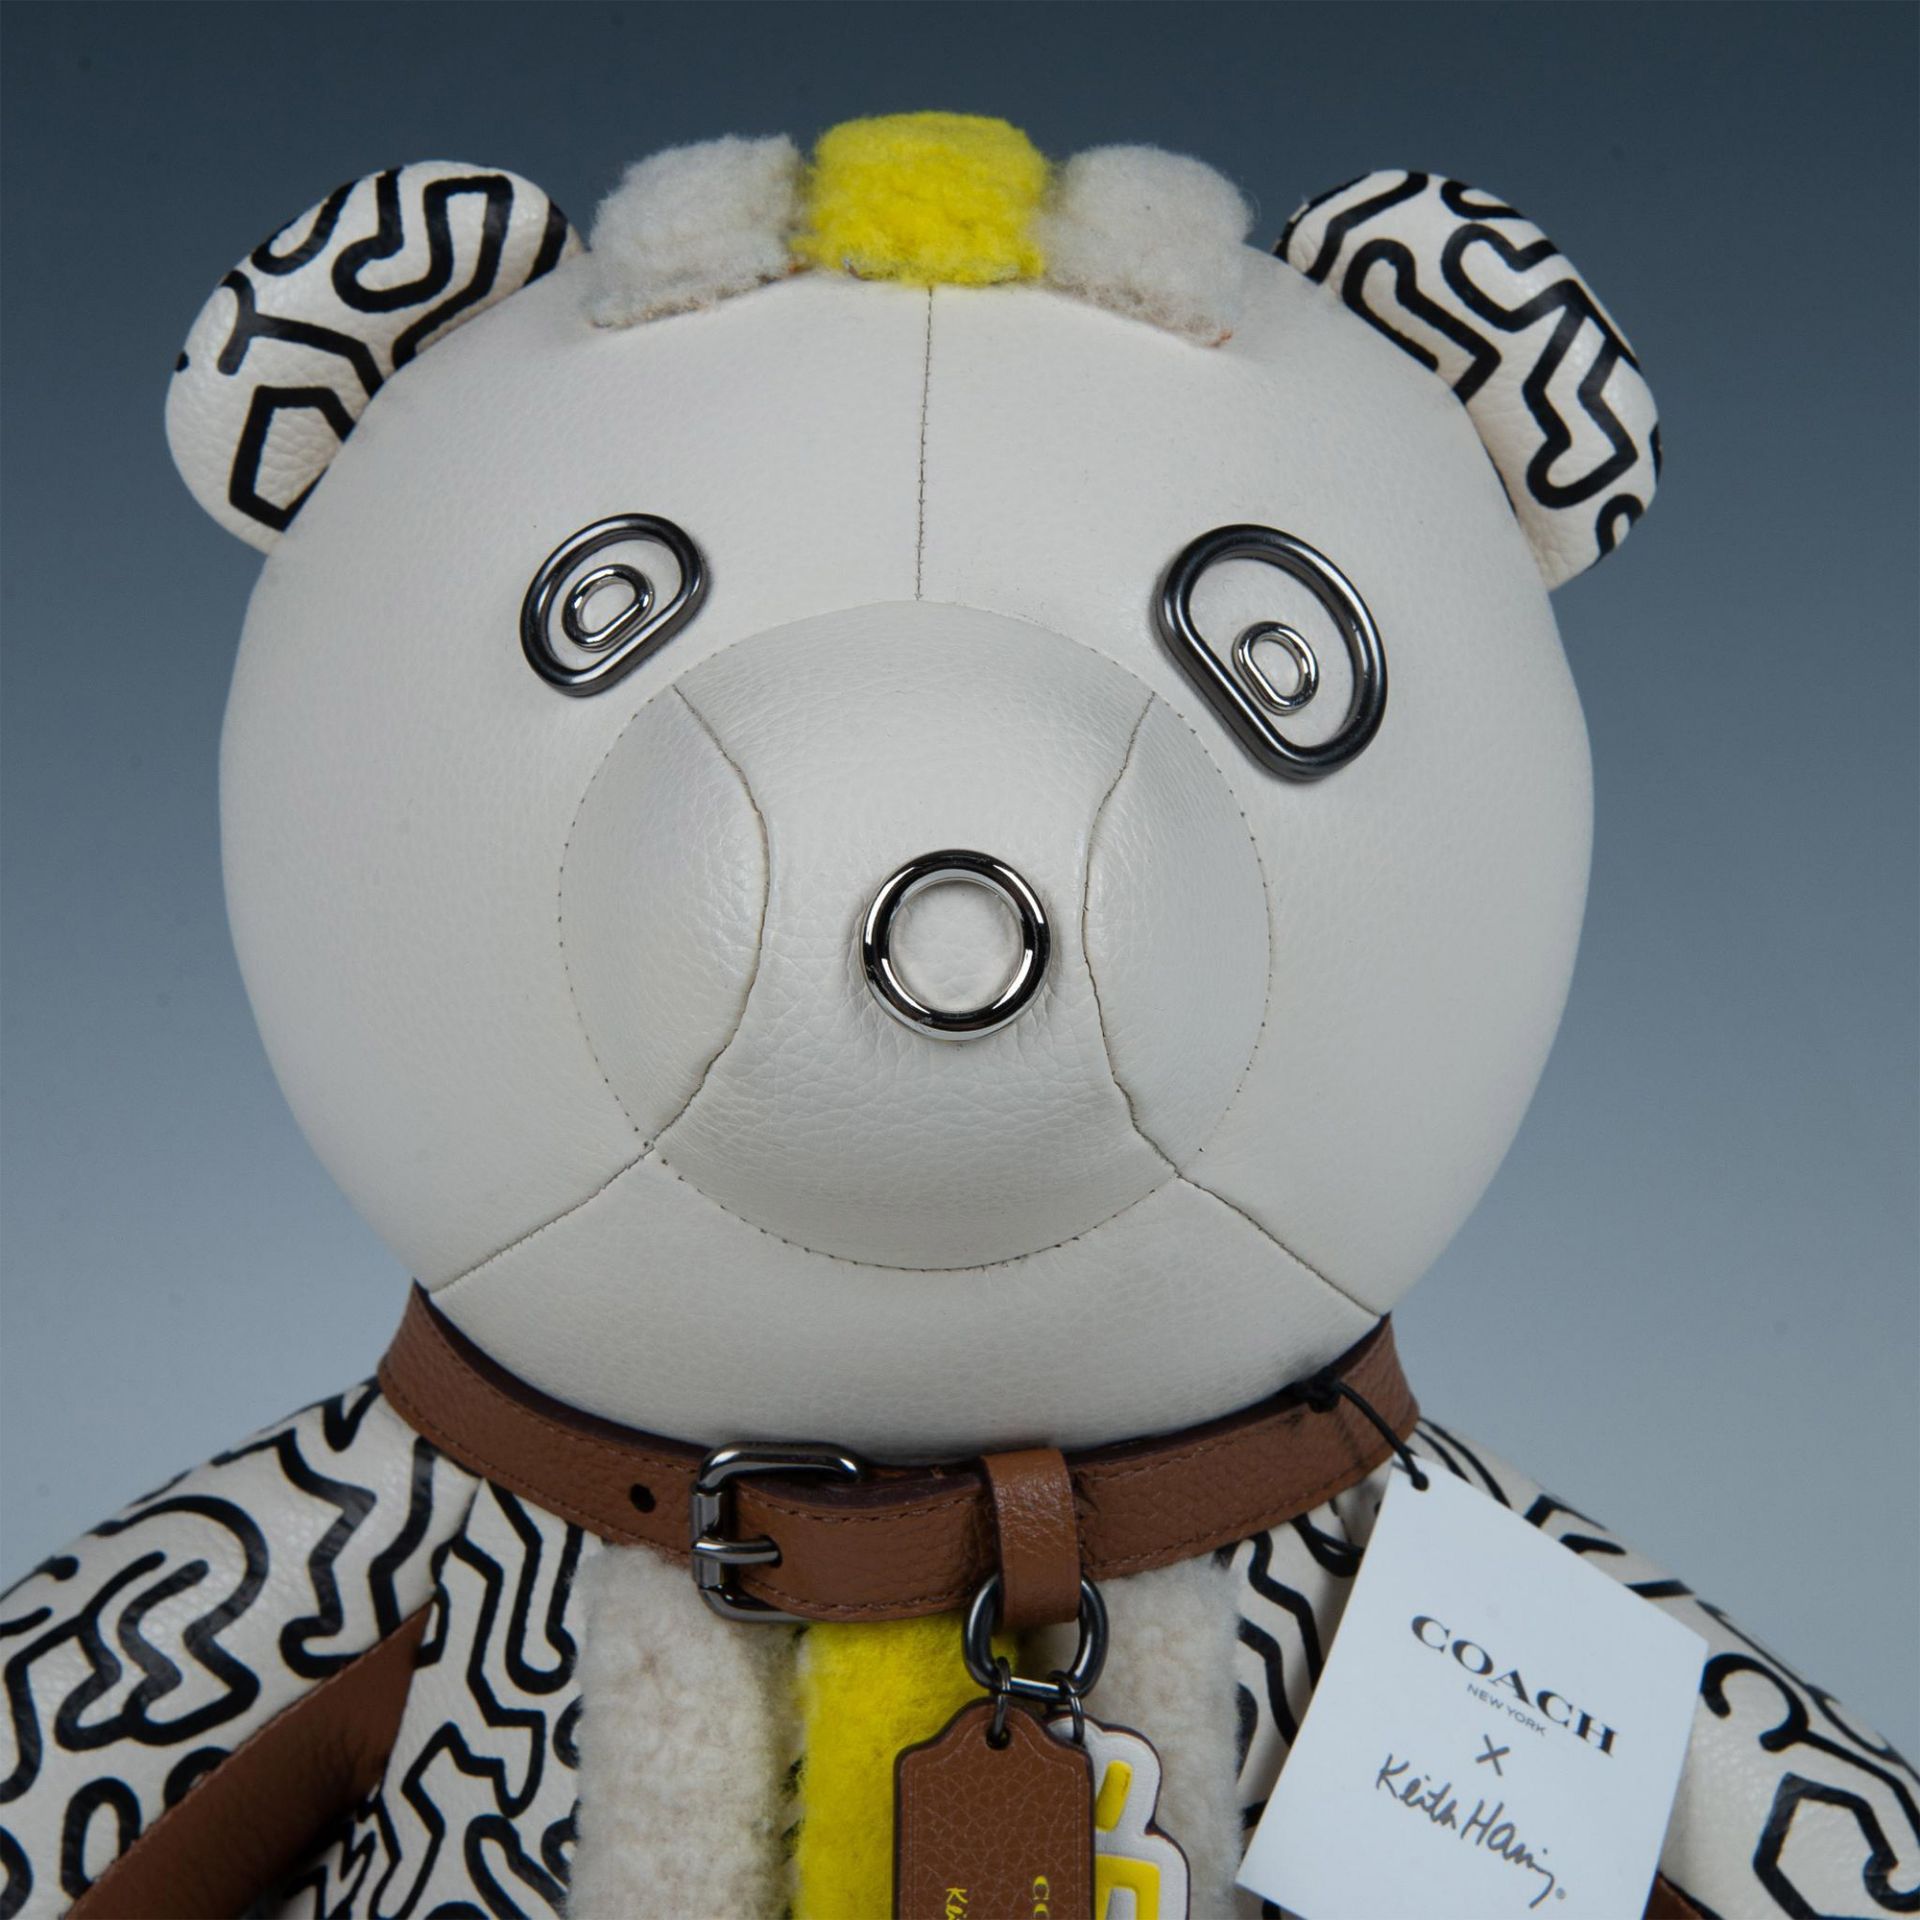 Coach Keith Haring Collaboration Plush Leather Teddy Bear - Image 2 of 8